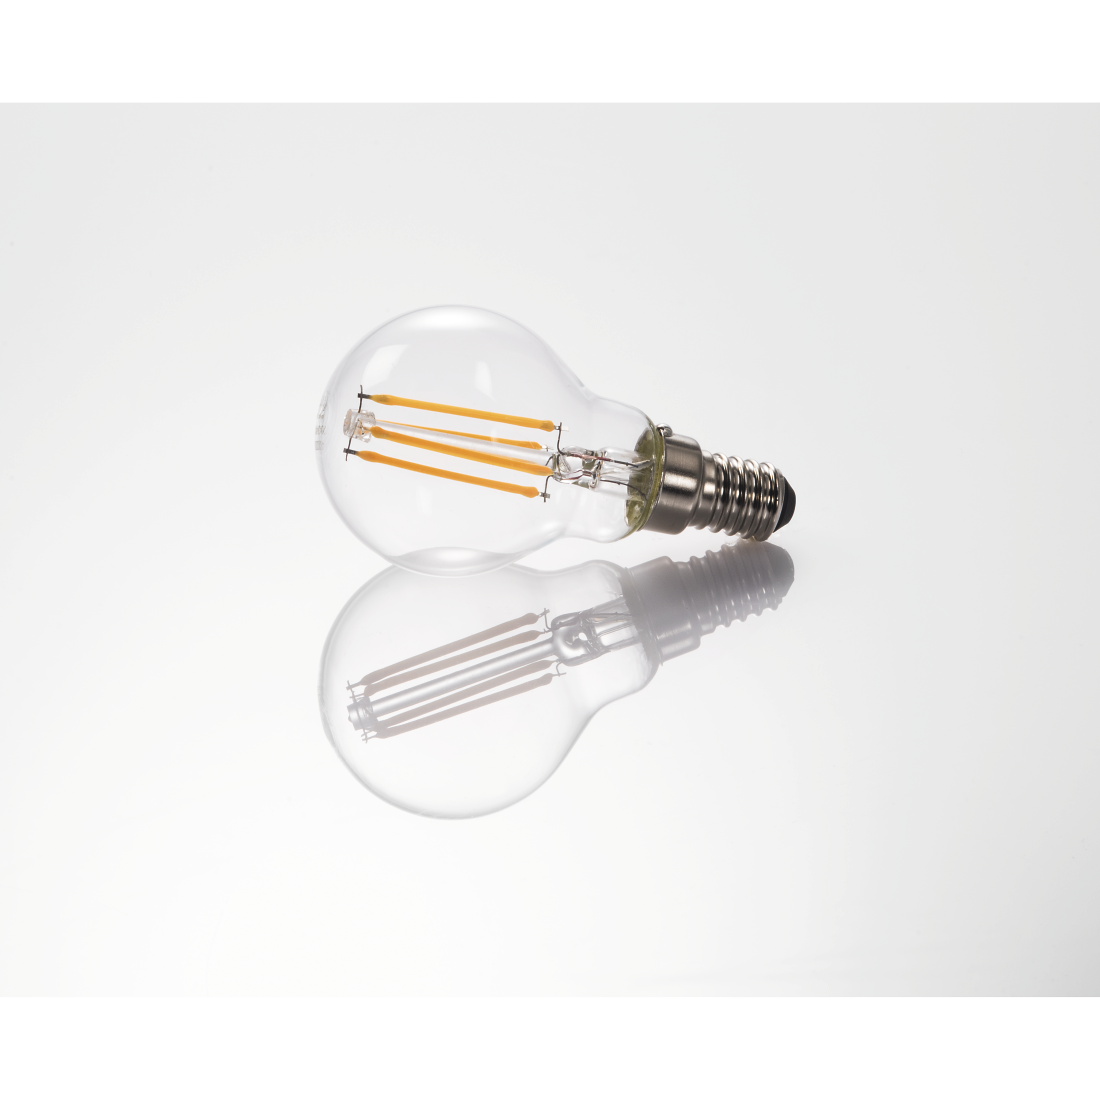 abx3 High-Res Image 3 - Xavax, LED Filament, E14, 470lm Replaces 40W, Drop Bulb, warm white, Dimmable